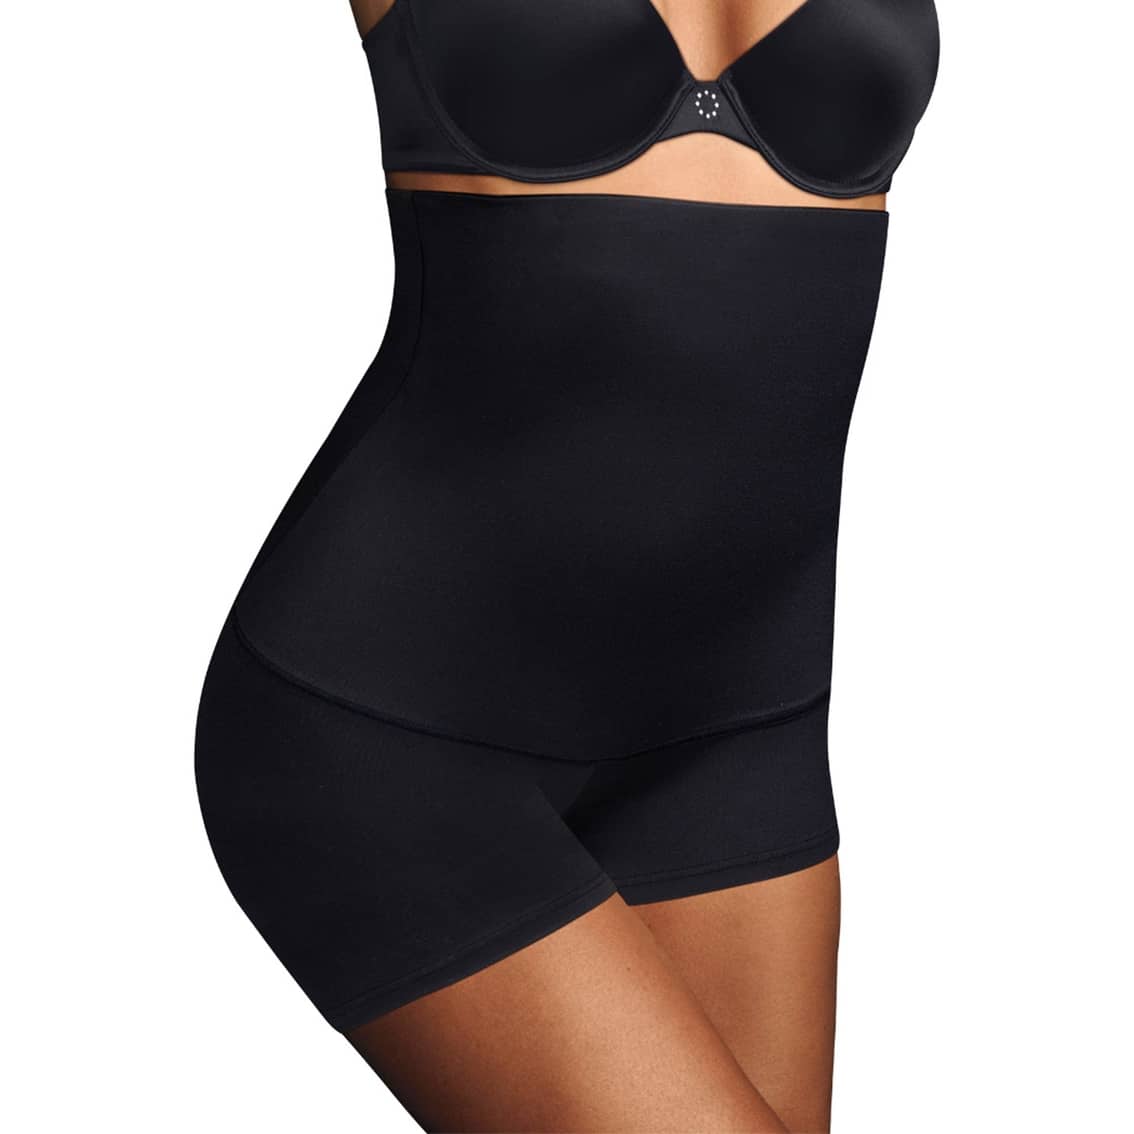 Get Nude: Underwear and Shapewear Brands Catering to Women of Color